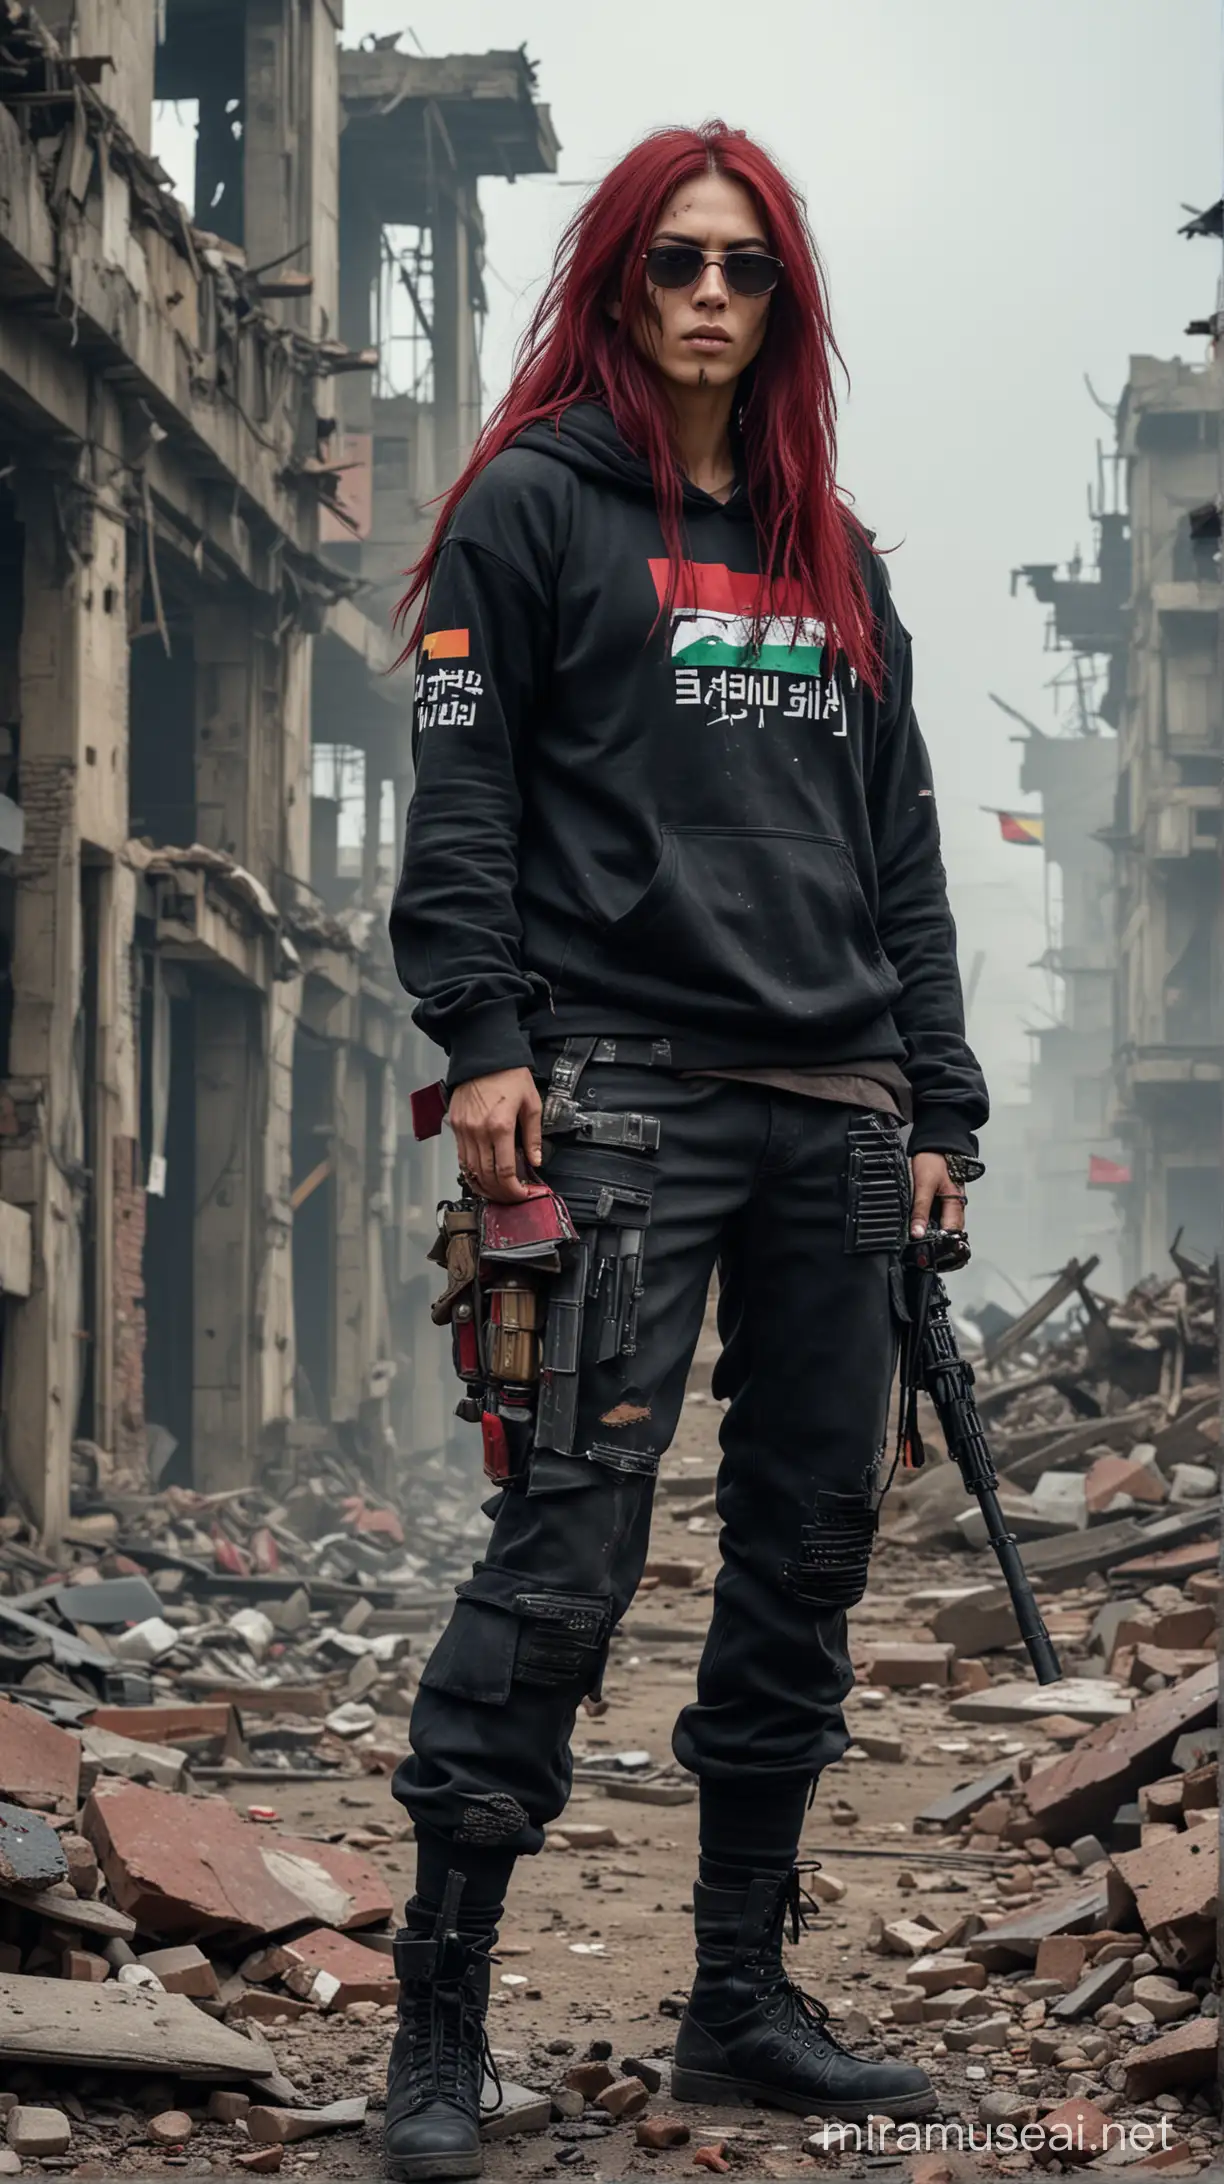 A samurai with very long maroon hair blowing in the wind, wearing red glasses, standing in the middle of the ruins of a destroyed city. he was wearing a black hoodie with the words "SINYO", and Palestinian flag badges on the sleeves, black cargo pants, and macbeth boots. in their hands, there was a dirty M249 machine gun, the W900 truck was black and battle-damaged in the background, with thick fog adding a gloomy and eerie atmosphere to the scene. UHD 8K, RAW..

